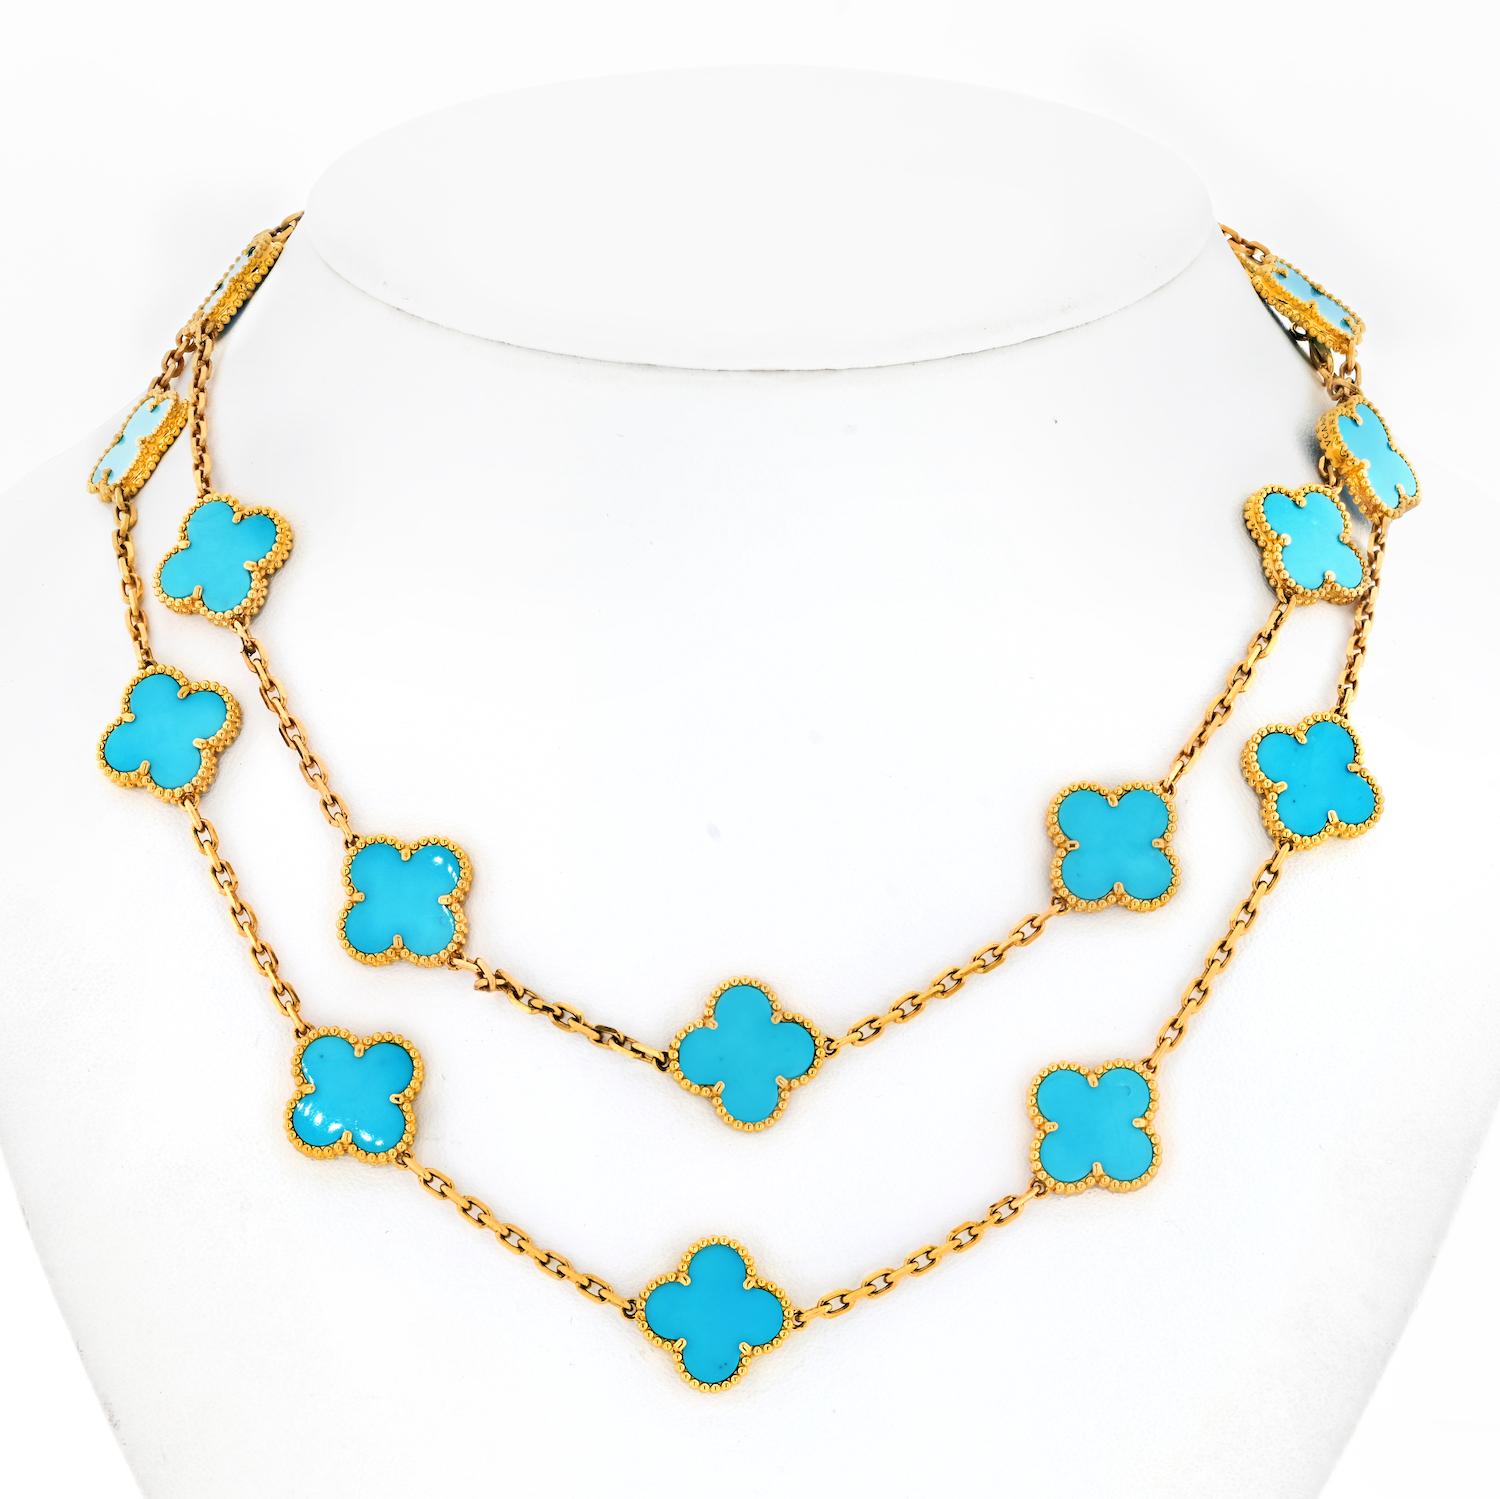 The Van Cleef & Arpels 18K Yellow Gold 20 Motif Vintage Alhambra Turquoise Necklace is a true work of art. Crafted by the renowned French jewelry house, the necklace features the iconic Alhambra motif, which has been a symbol of luck, love, and